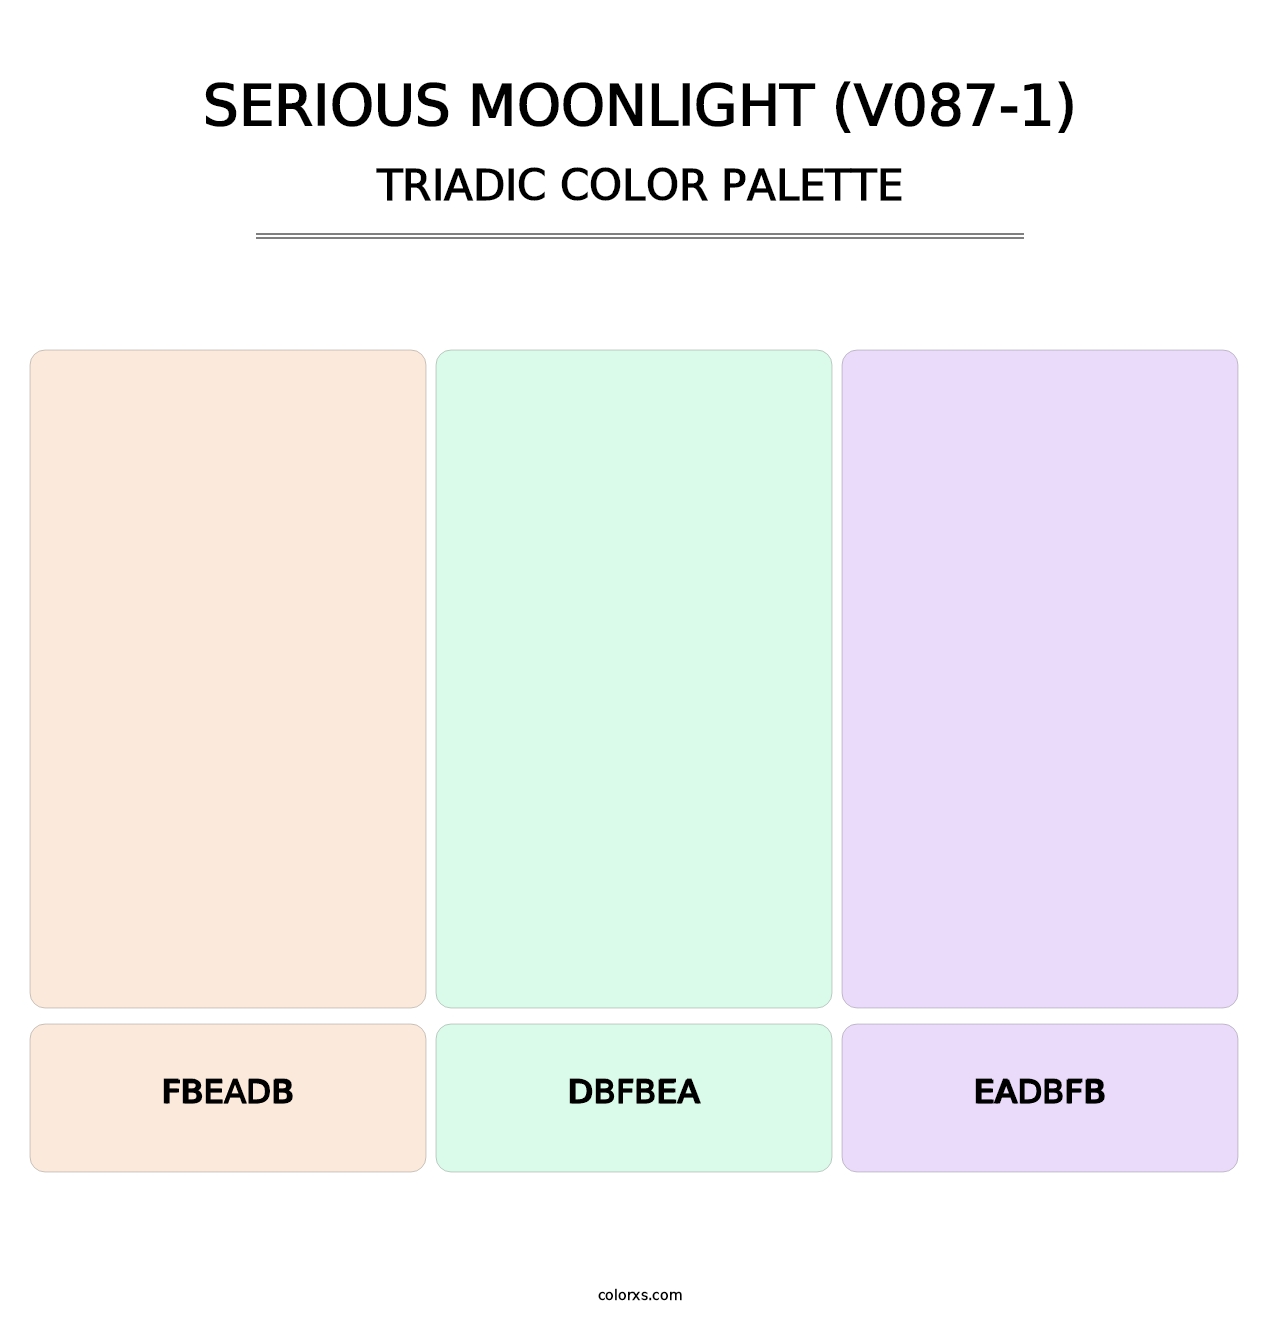 Serious Moonlight (V087-1) - Triadic Color Palette